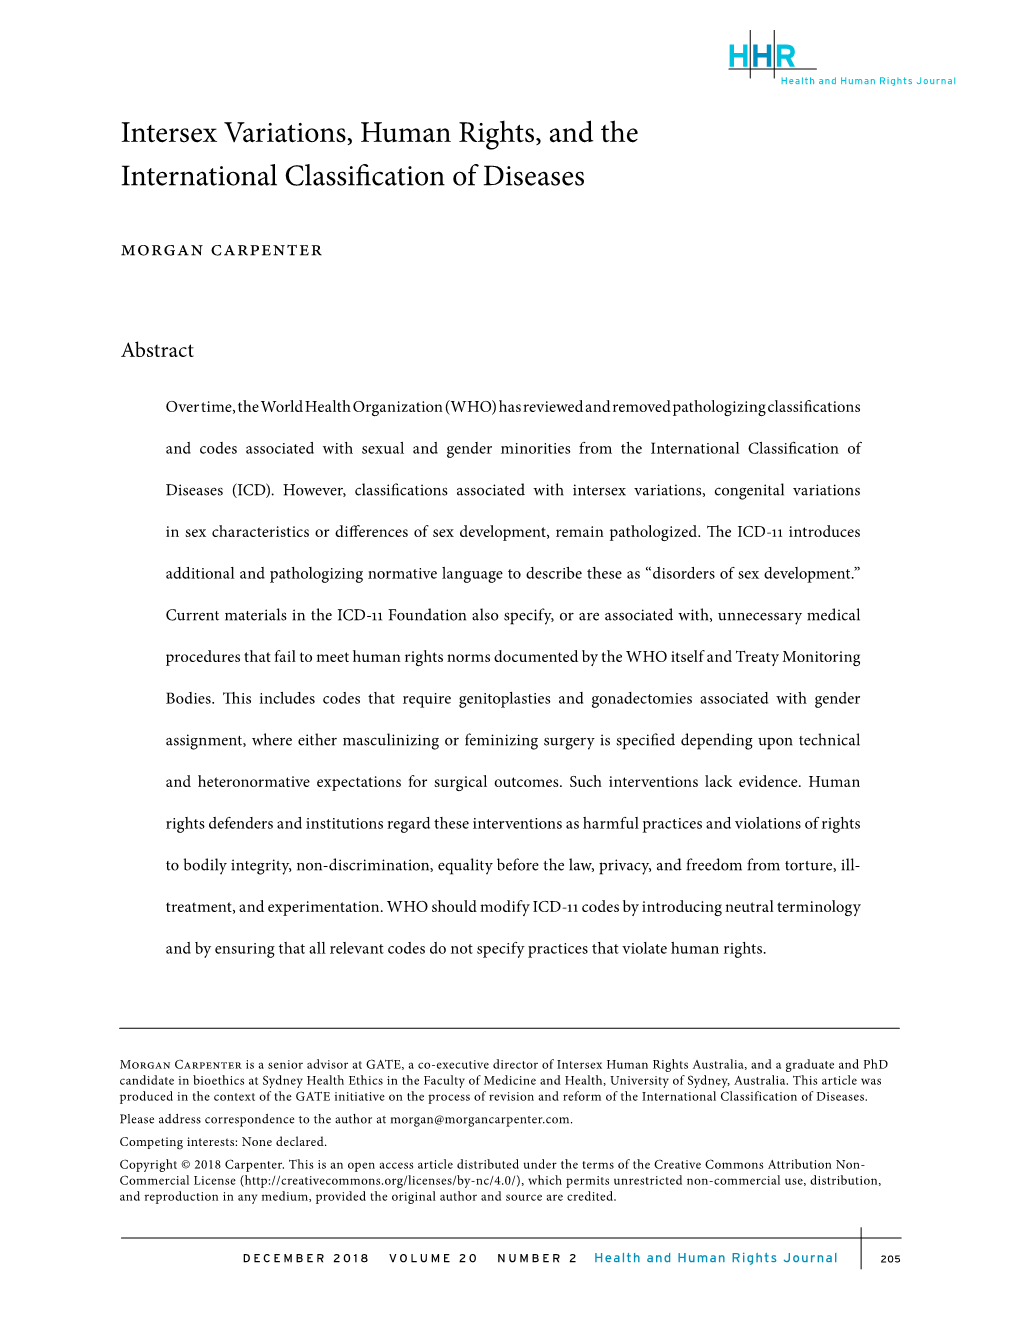 Intersex Variations, Human Rights, and the International Classification